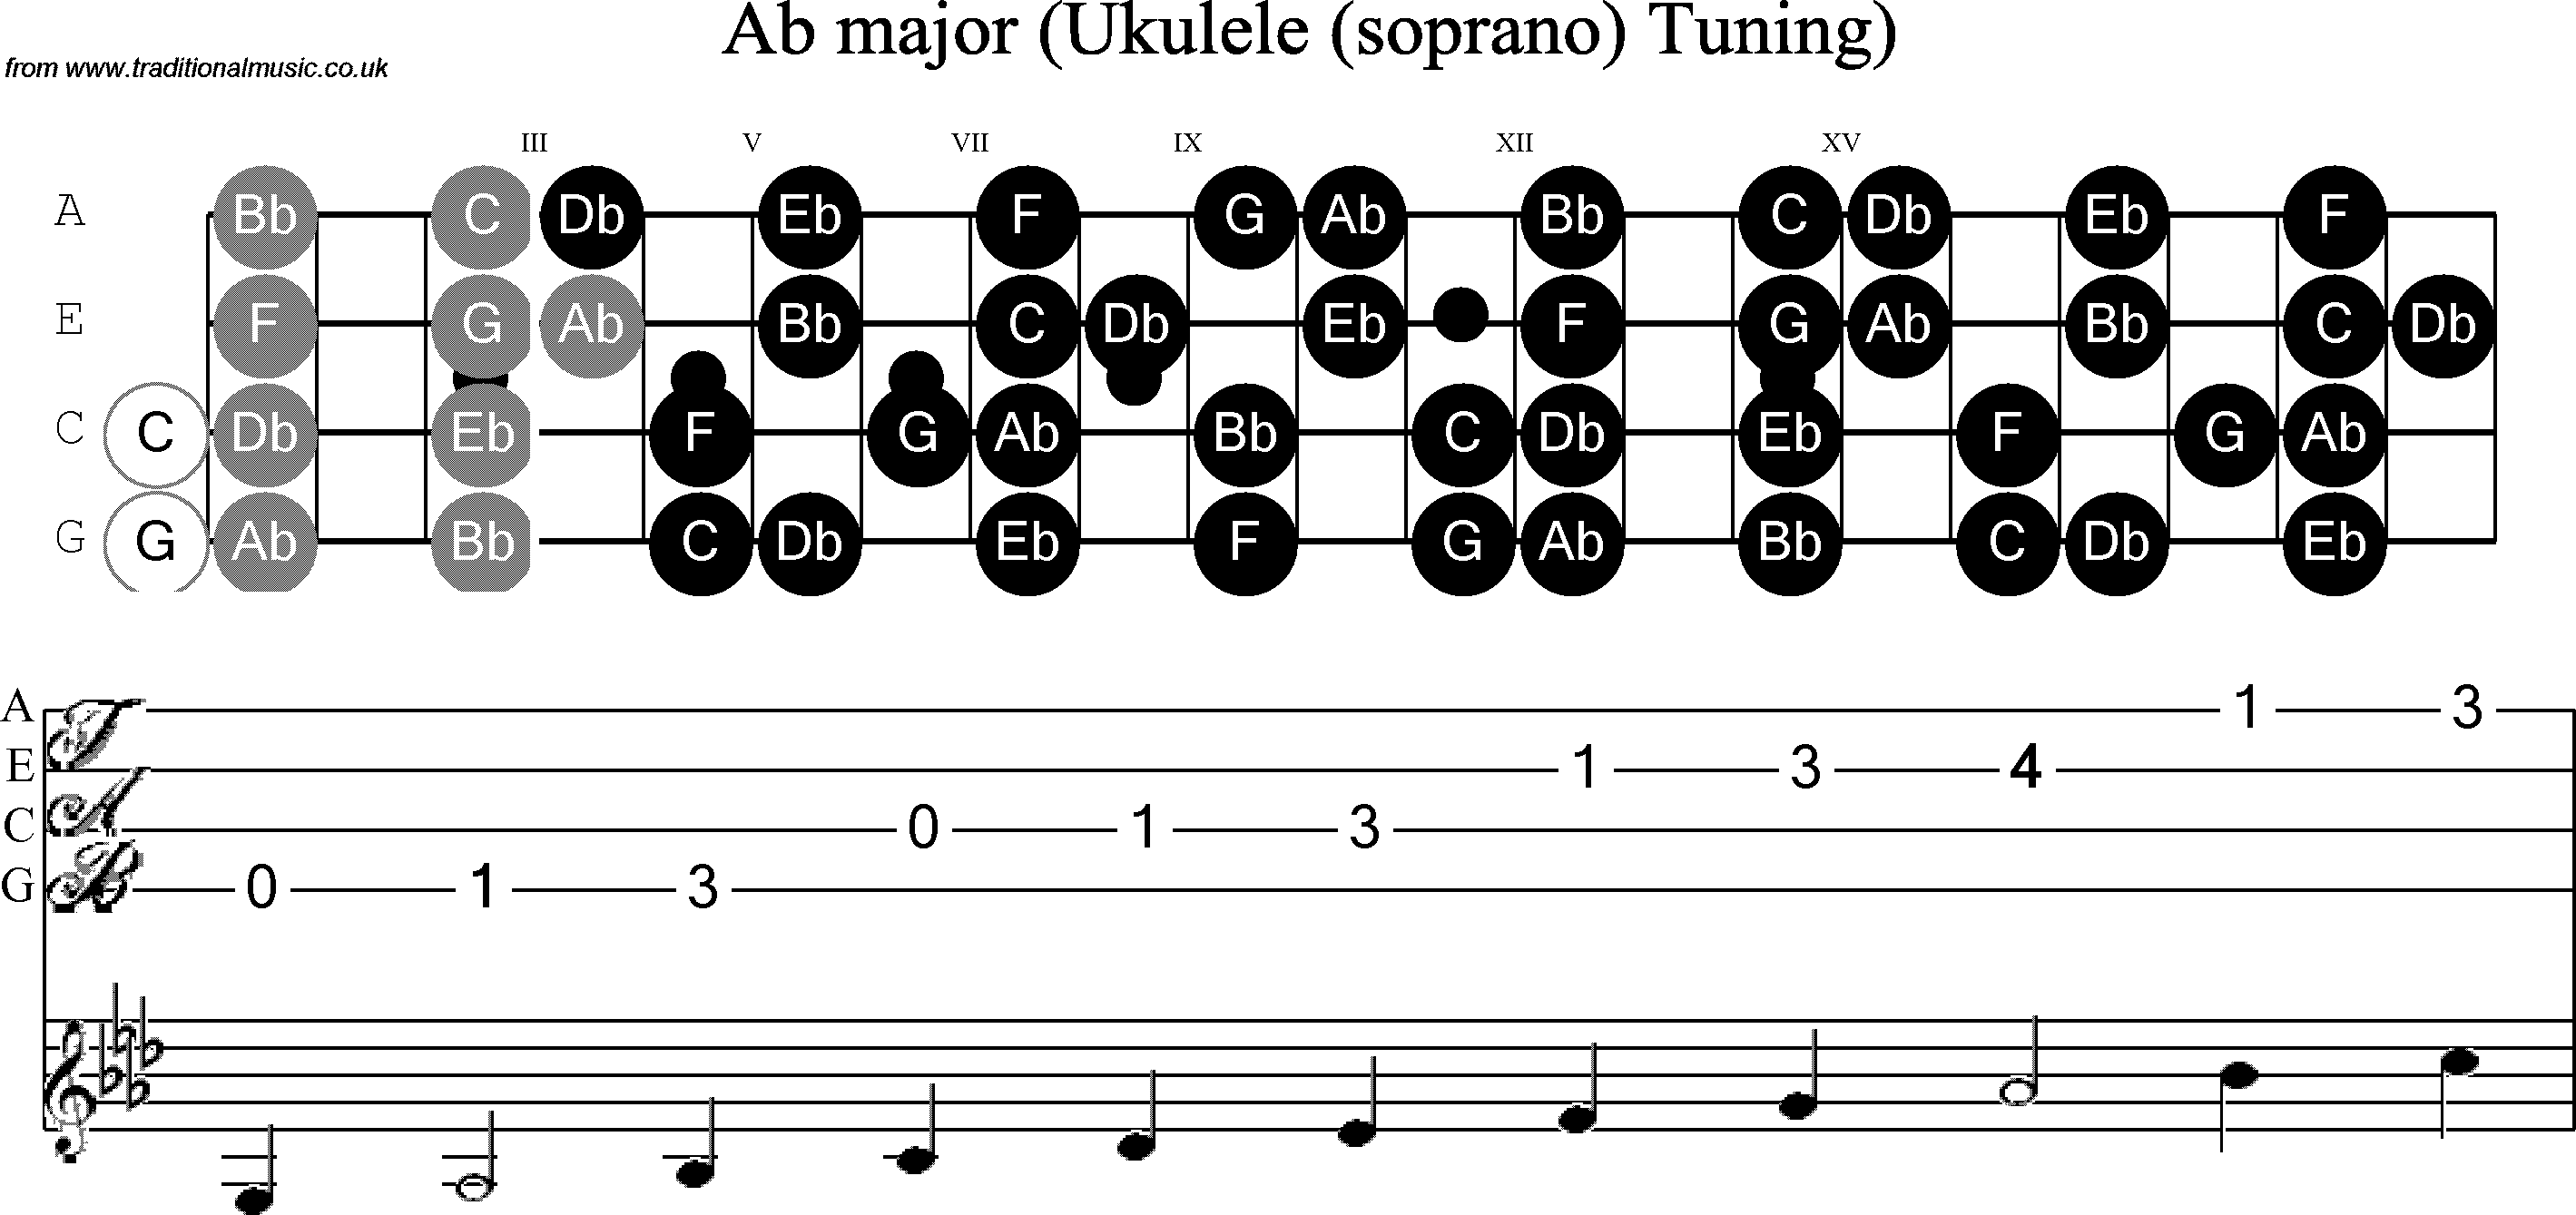 Scale, stave and neck diagram for Ukulele Ab